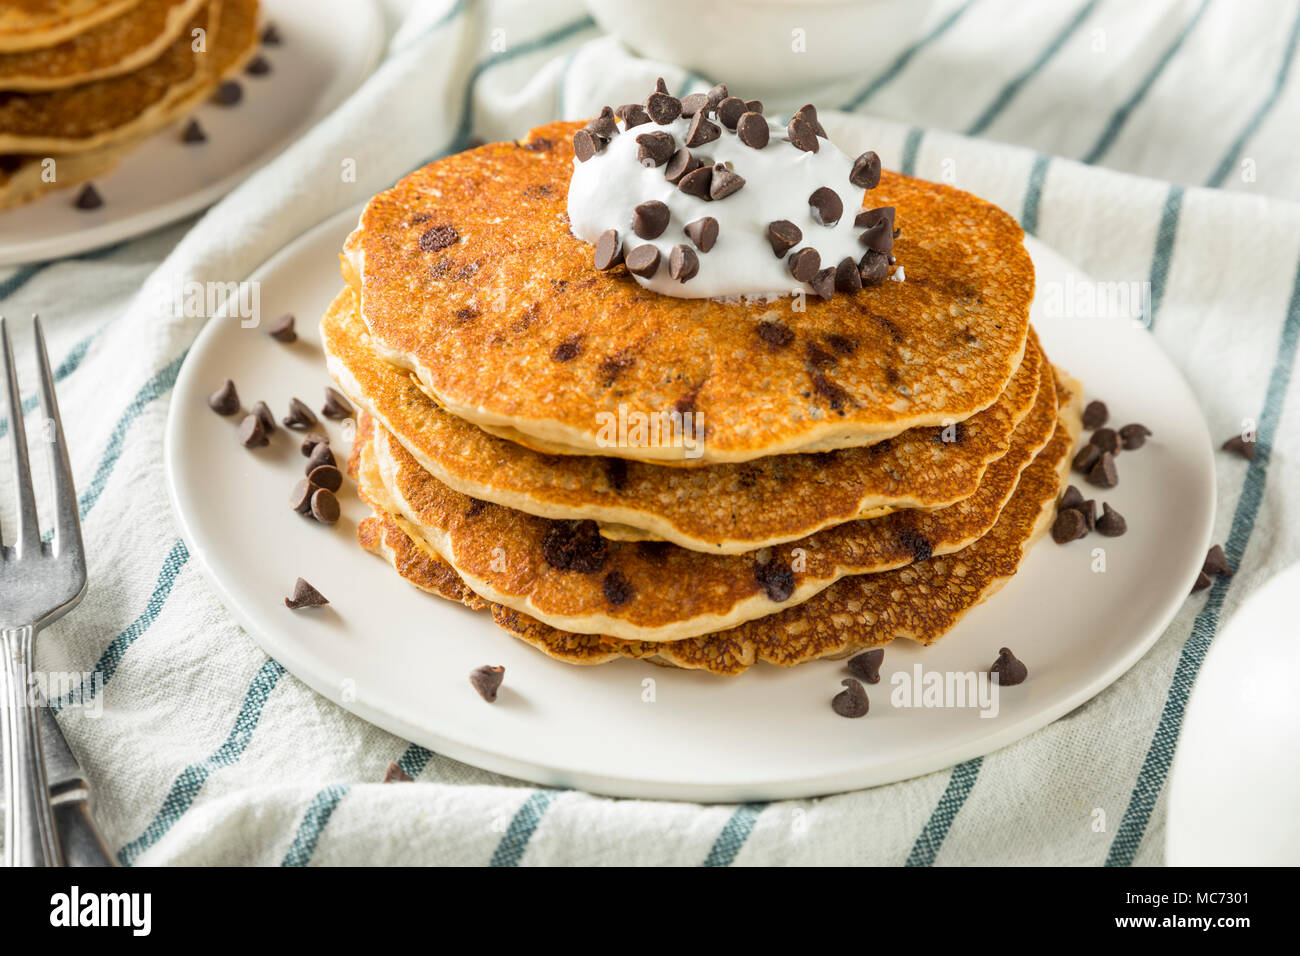 Homemade Chocolate Chip Pancakes with Whipped Cream Stock Photo